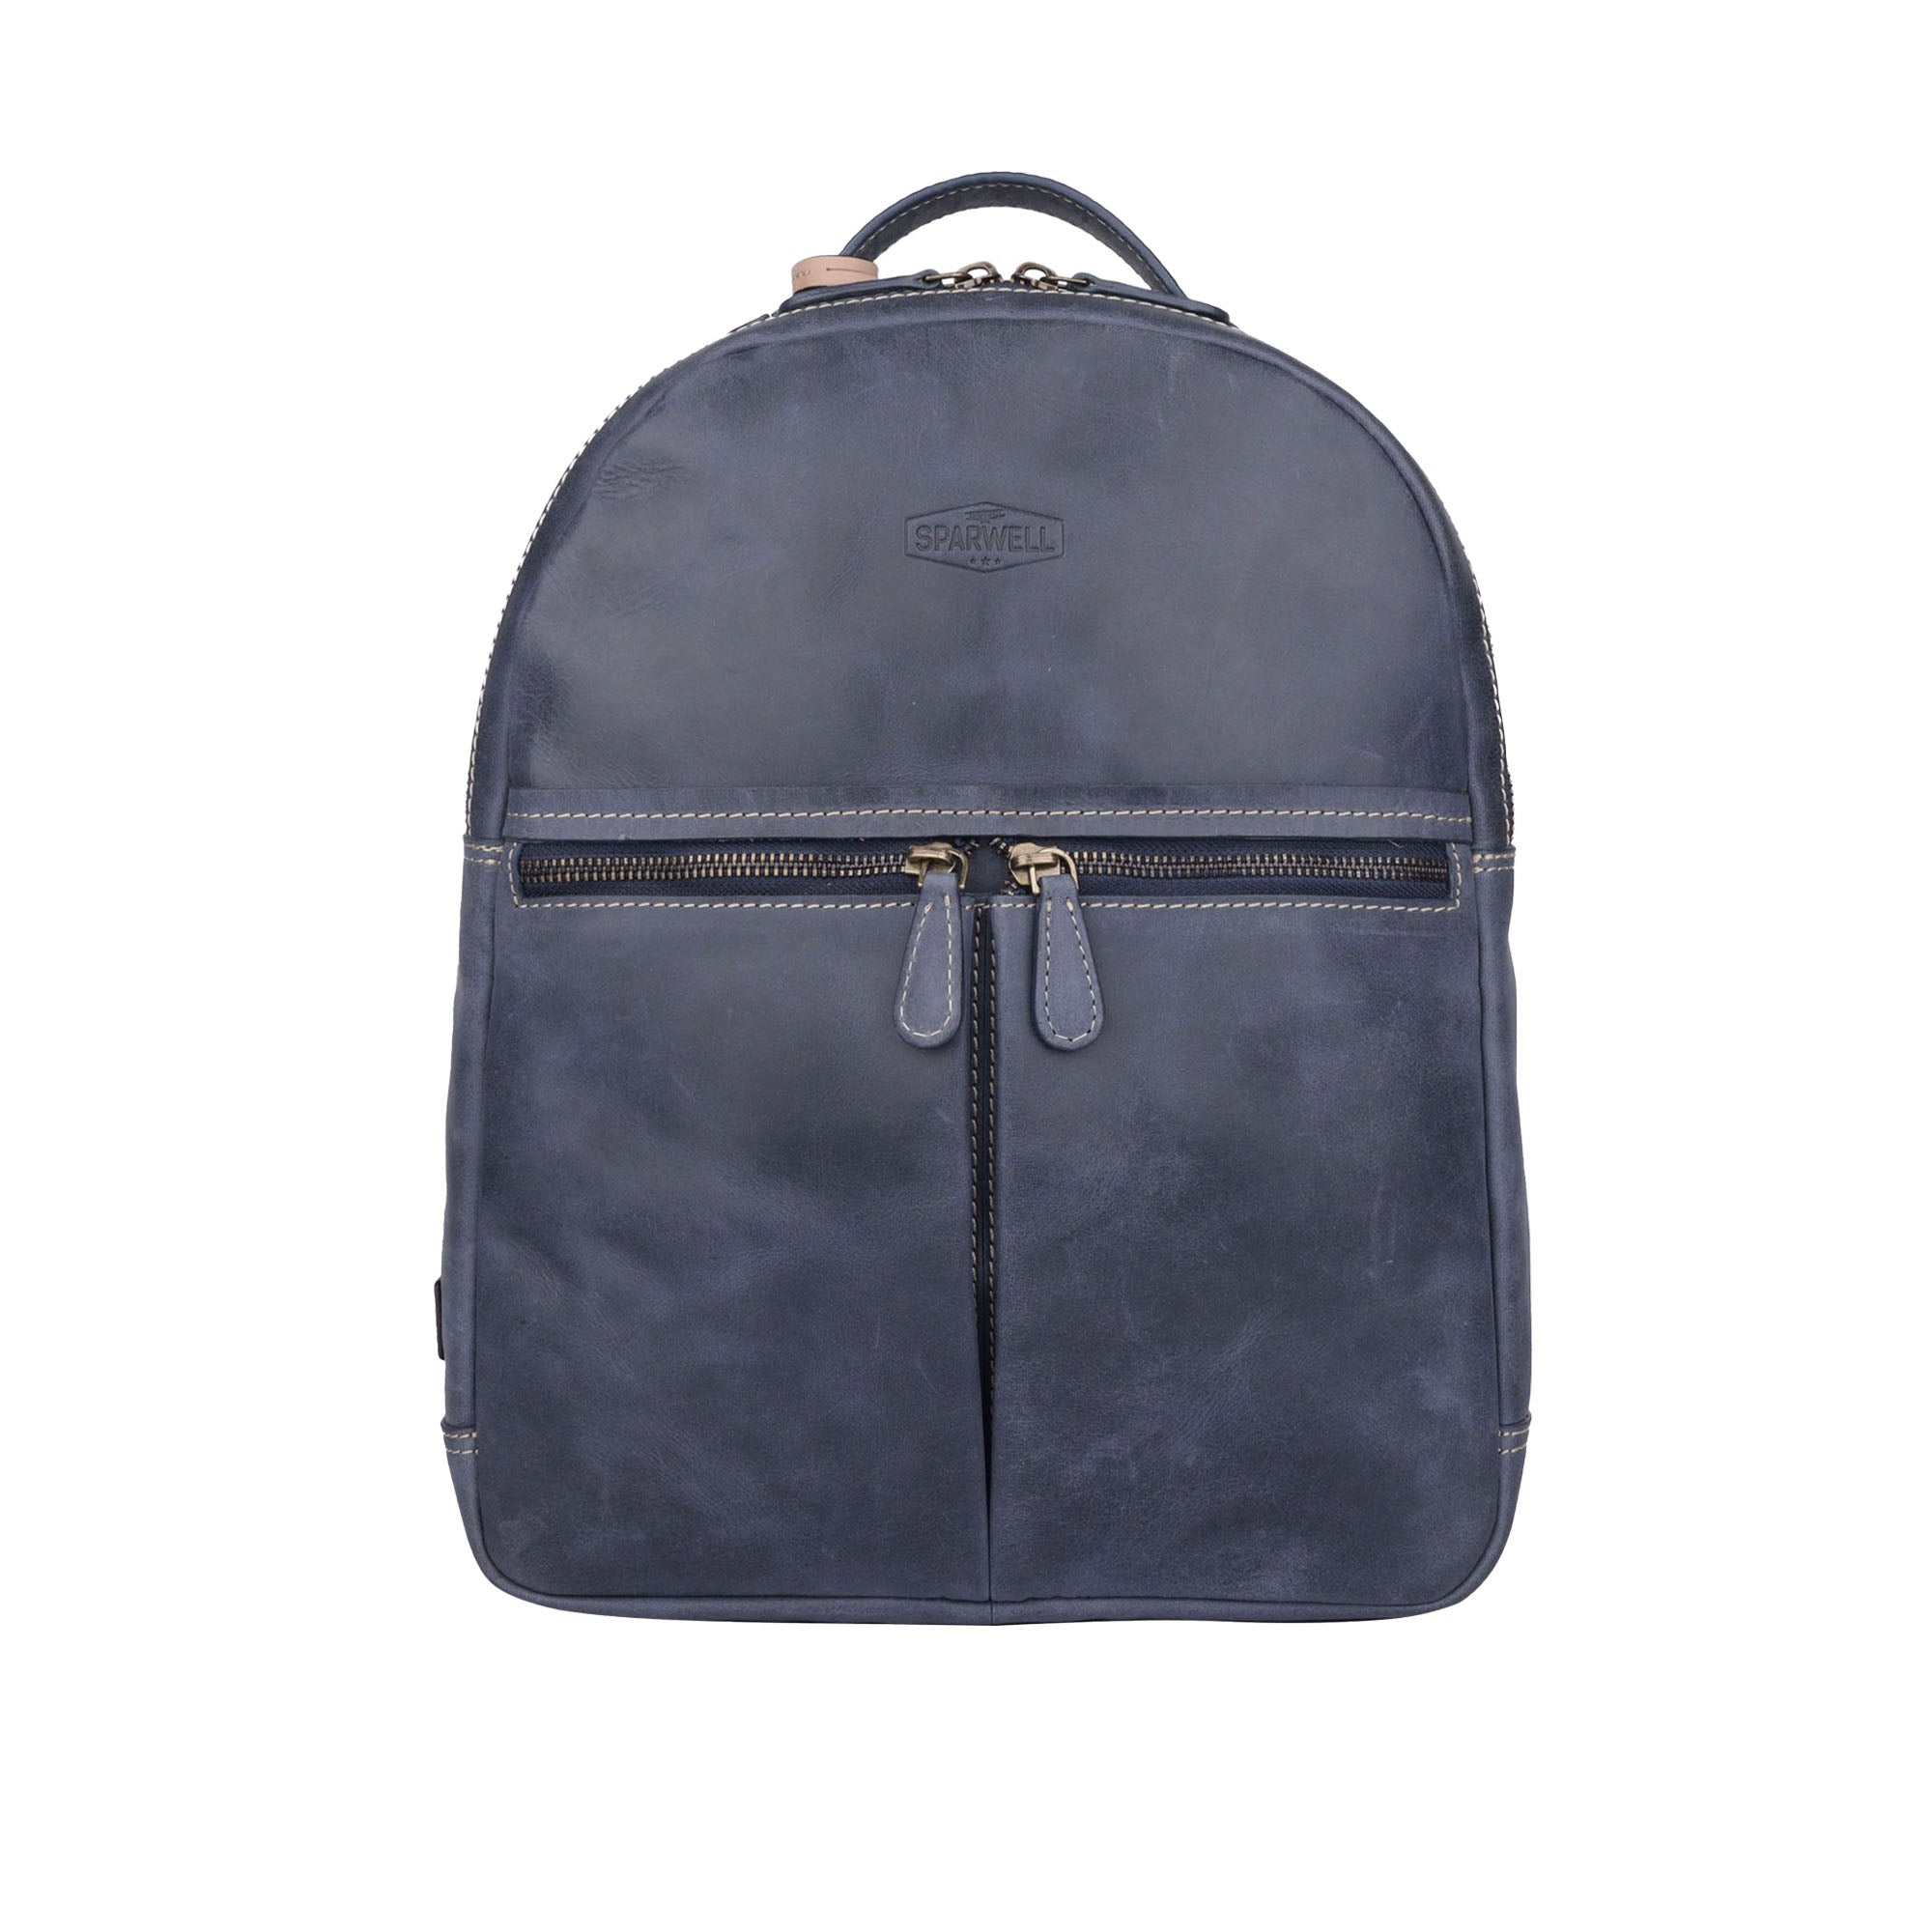 Trendy Tina - leather backpack for her